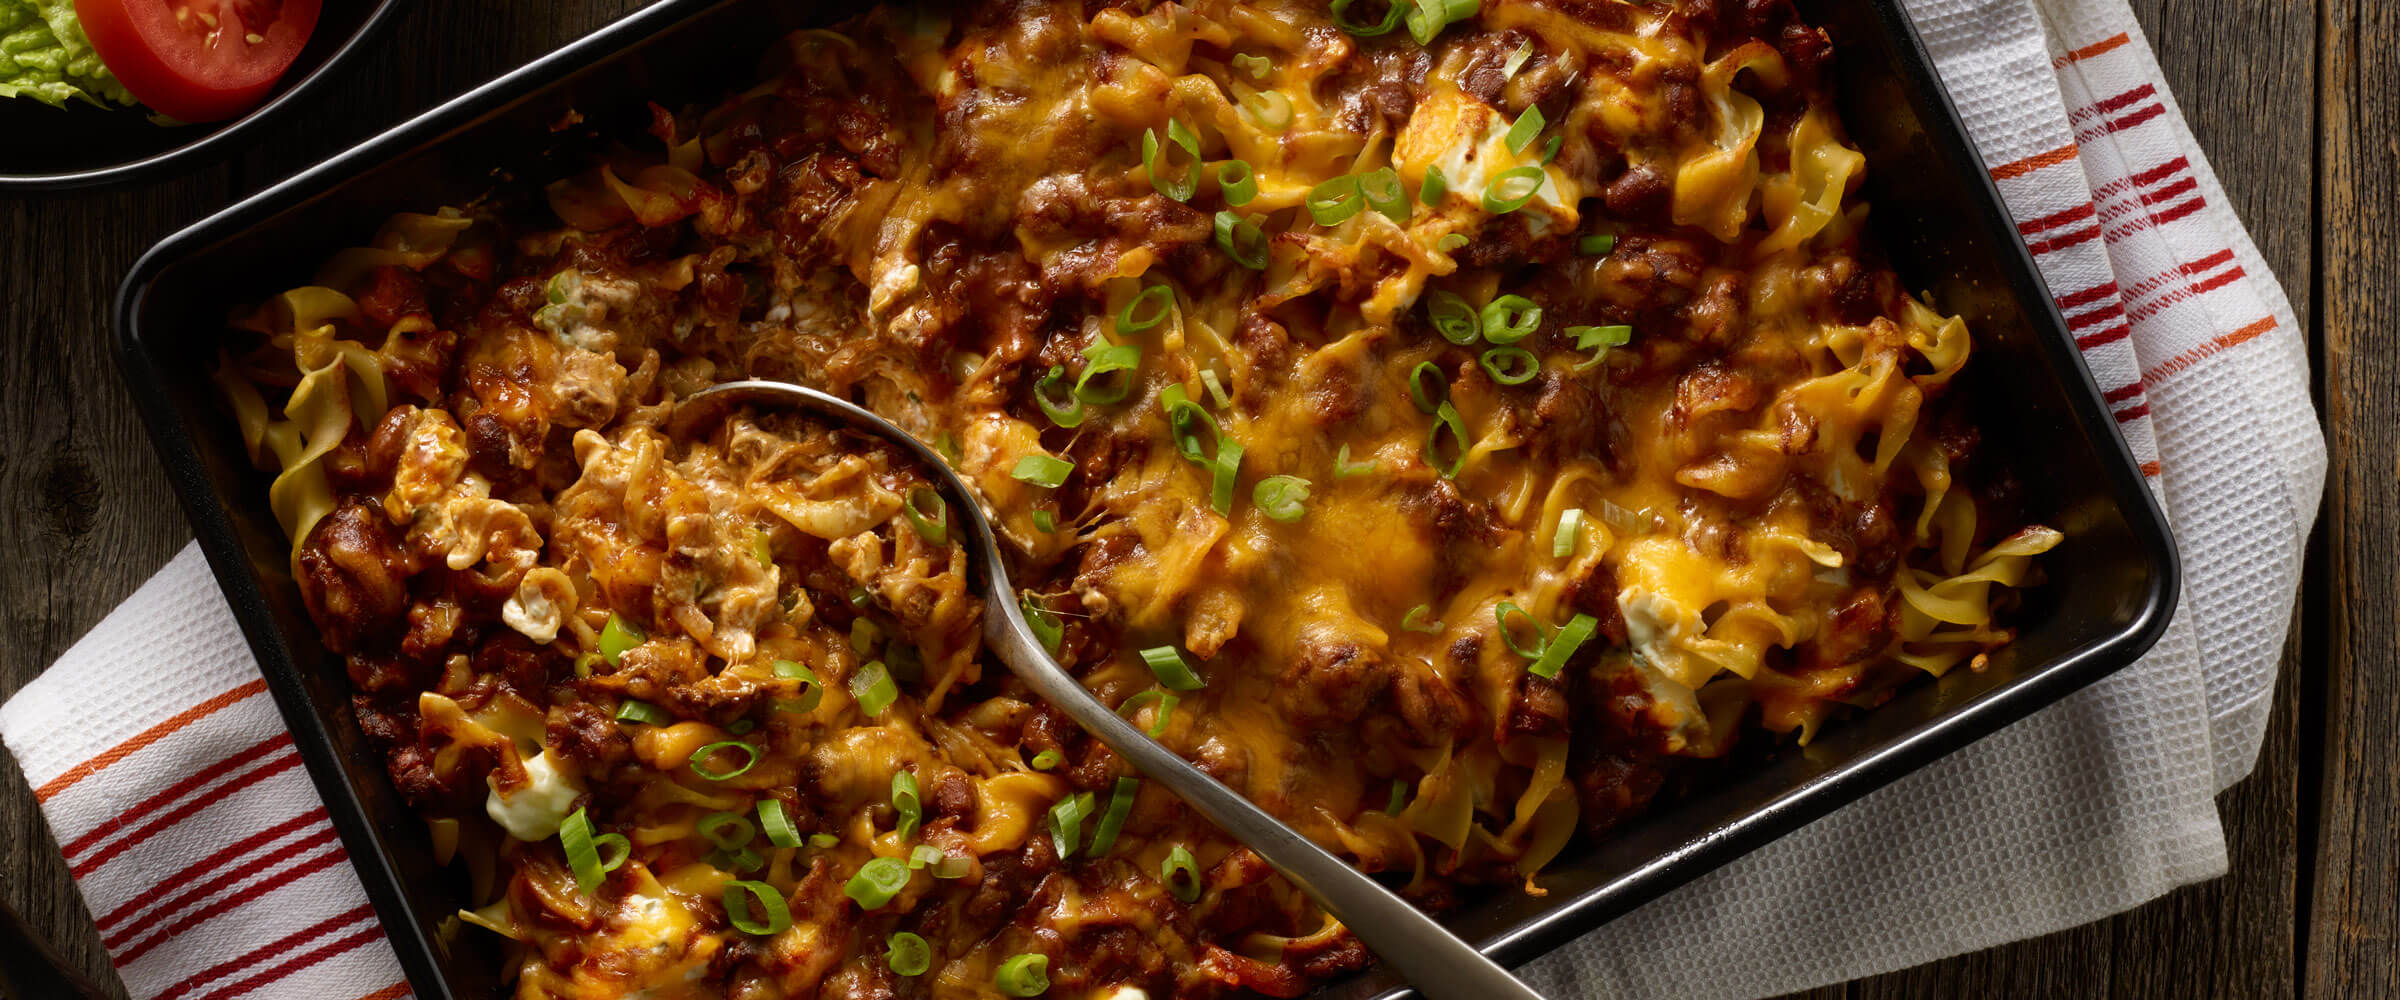 Layered Southwest Chili Mac Bake in black dish topped with cheese and green onions on linen